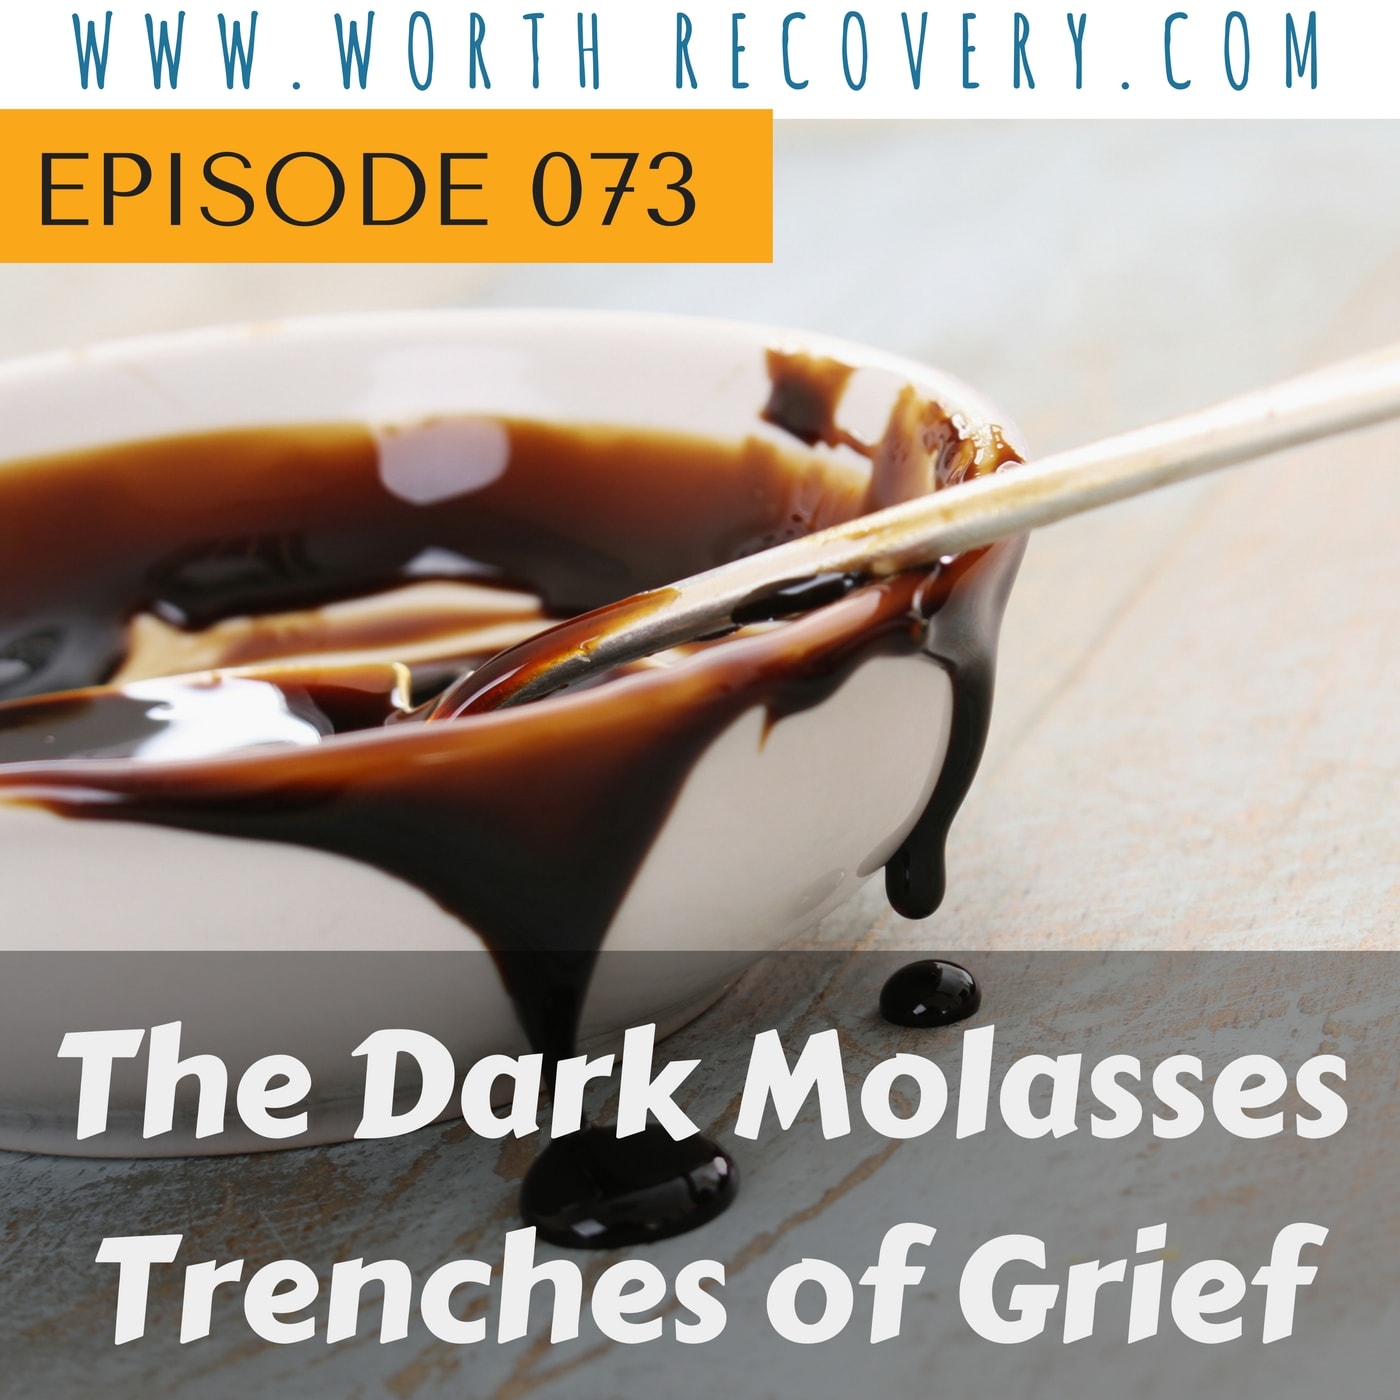 Episode 073: The Dark Molasses Trenches of Grief